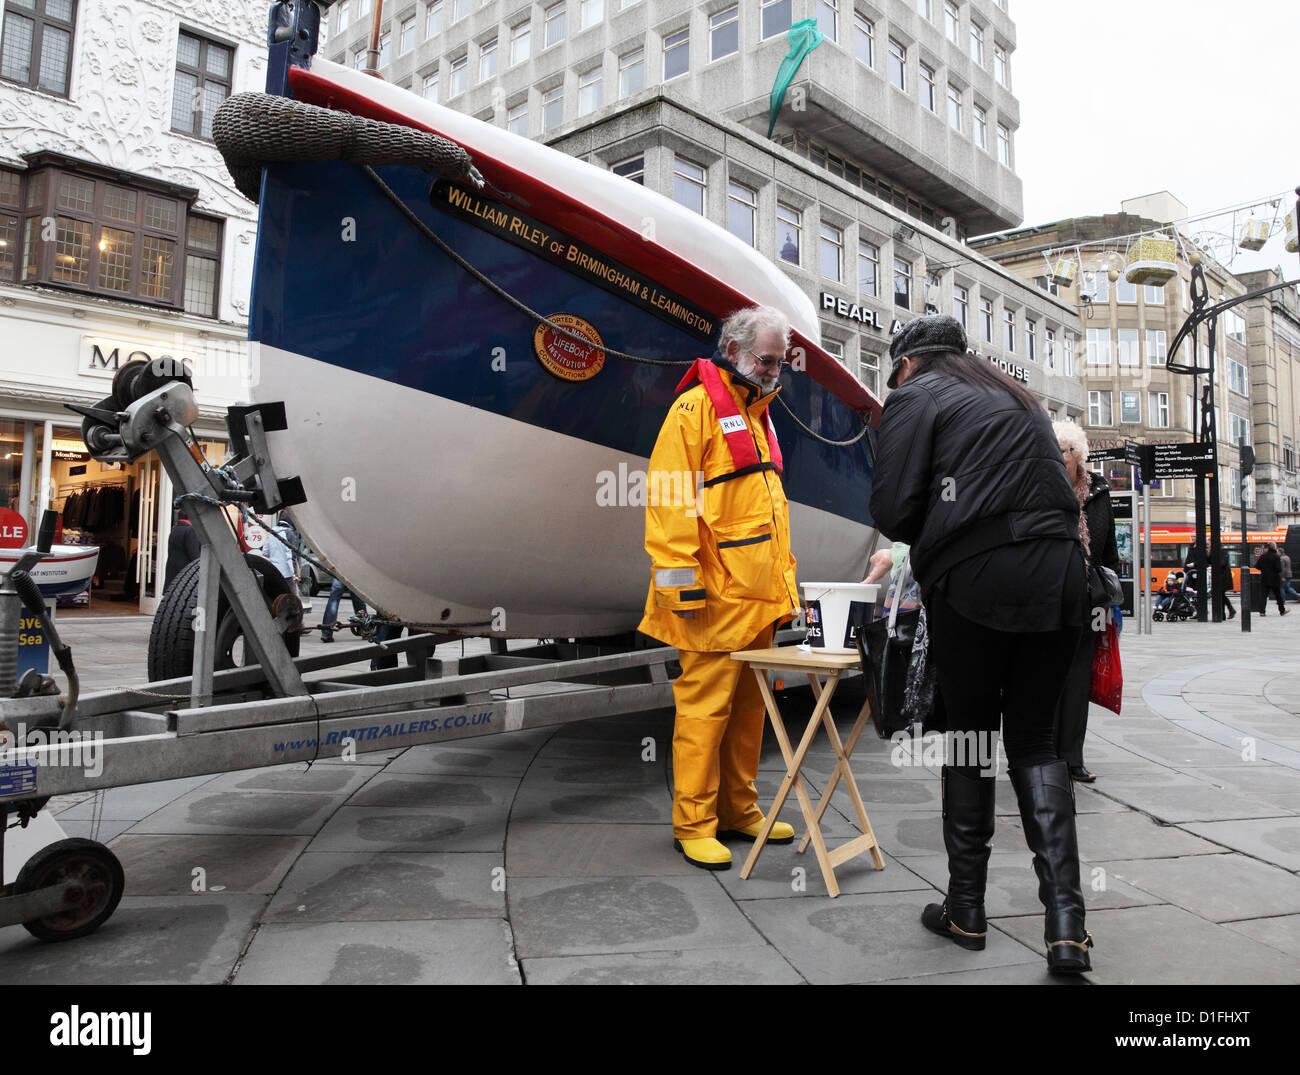 Man collecting for RNLI lifeboat charity Newcastle  city centre north east England UK Stock Photo